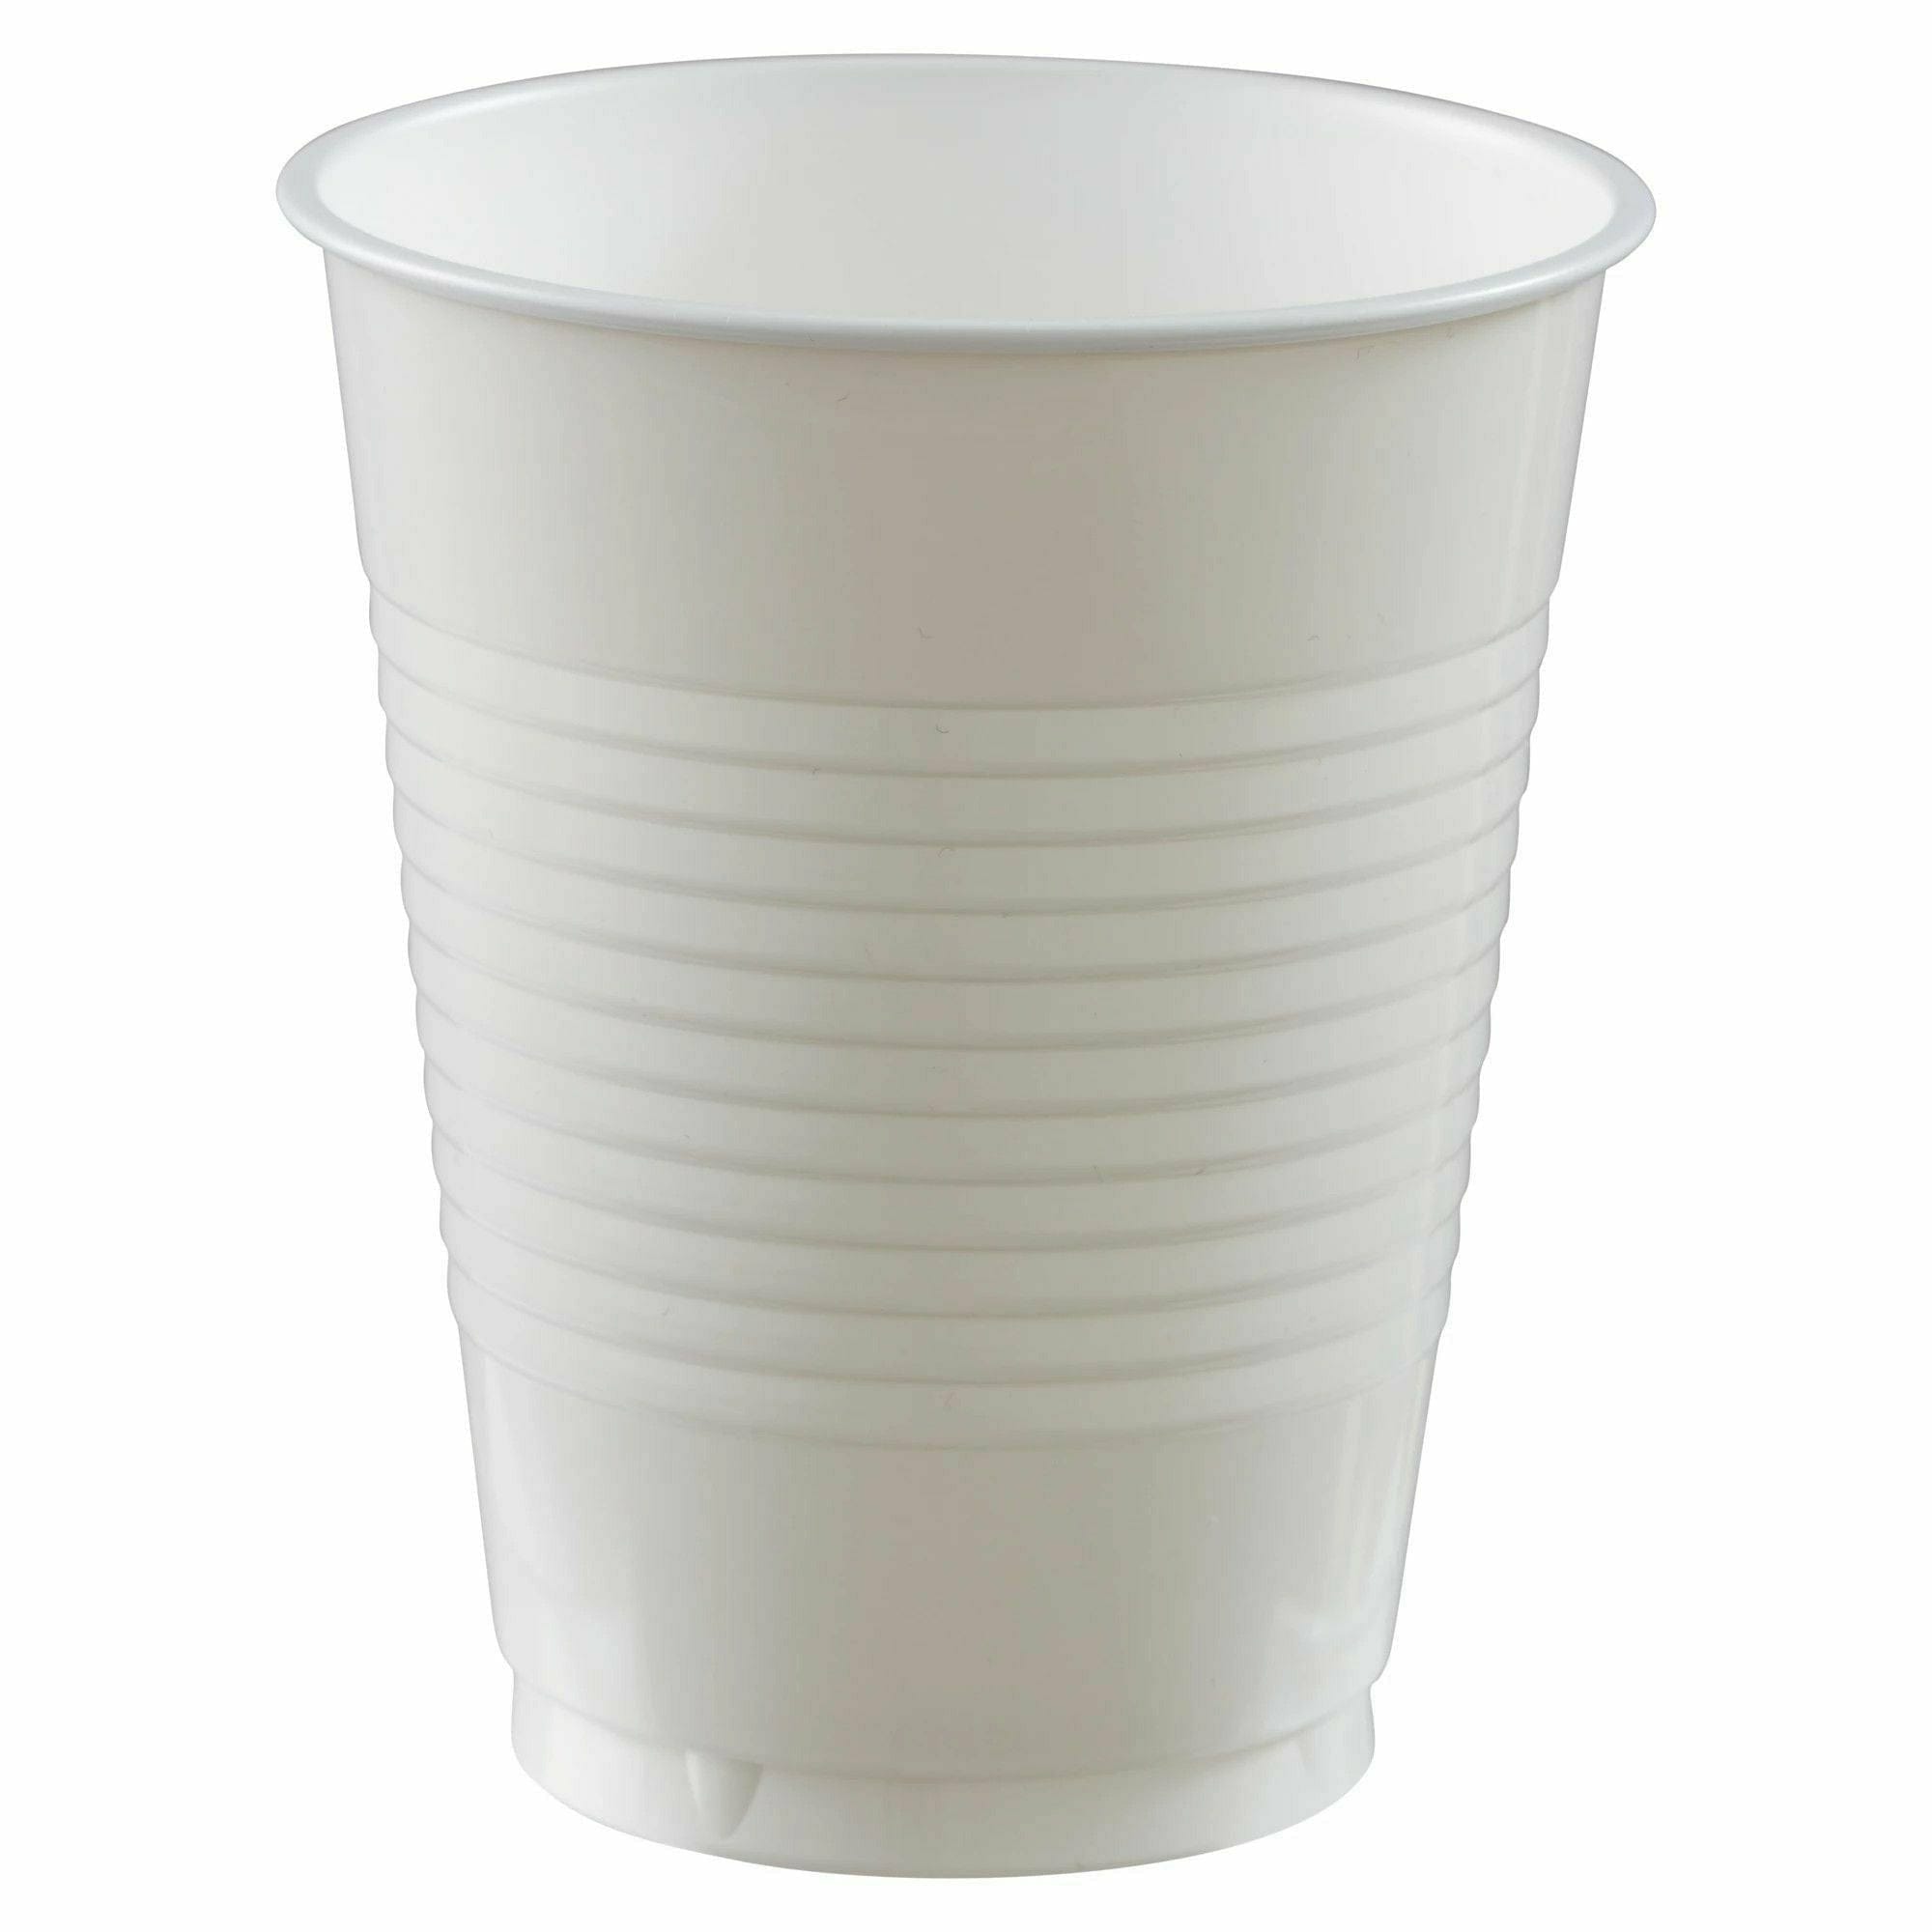 Amscan BASIC Frosty White - 18 oz. Plastic Cups, 20 Ct.